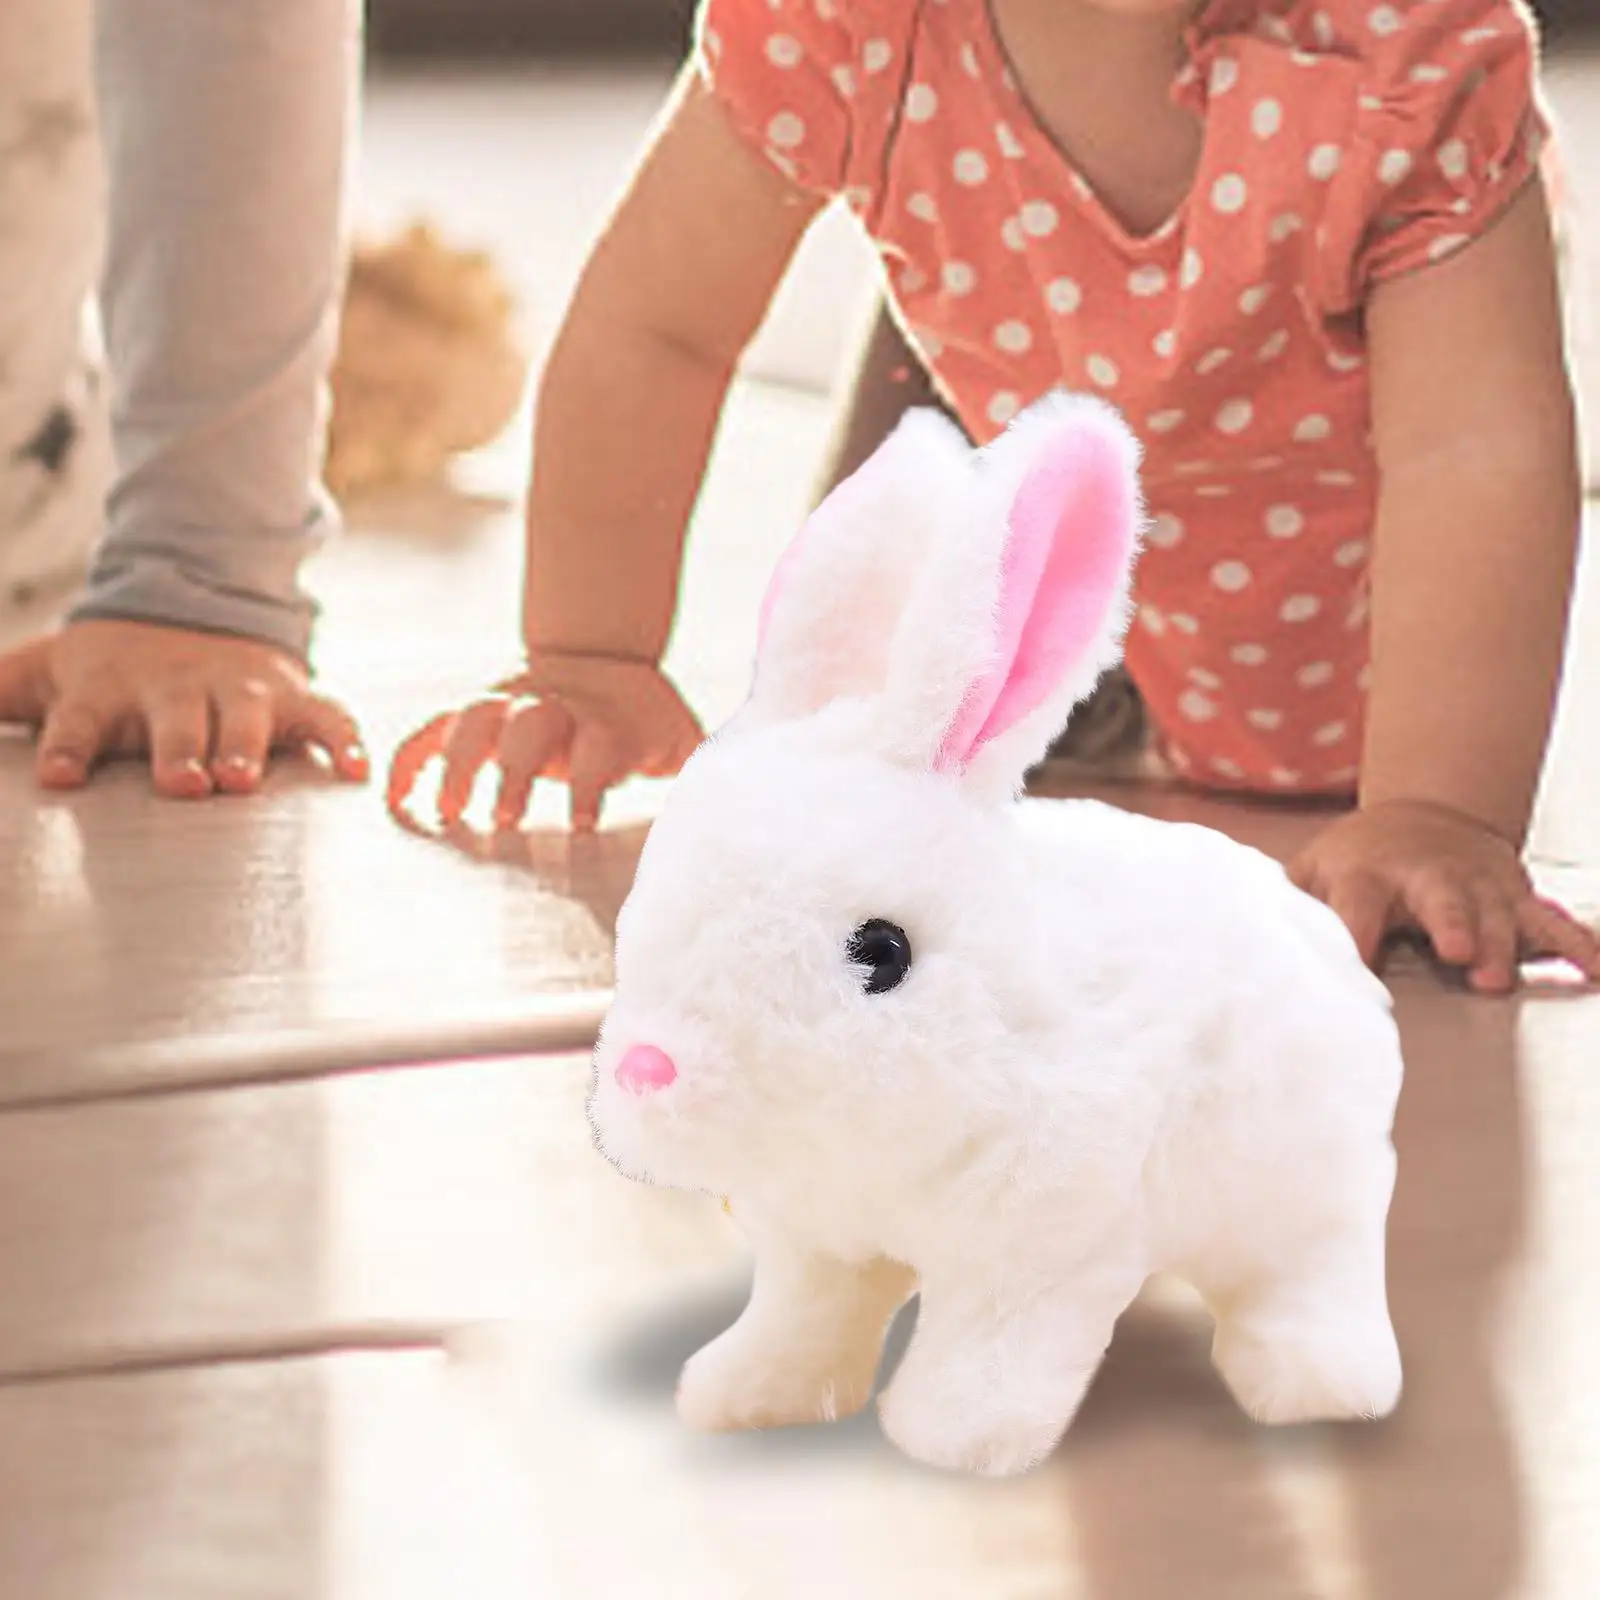 Electronic Plush Rabbit Toy Stuffed Animal Lovely for Girls and Boys Kids